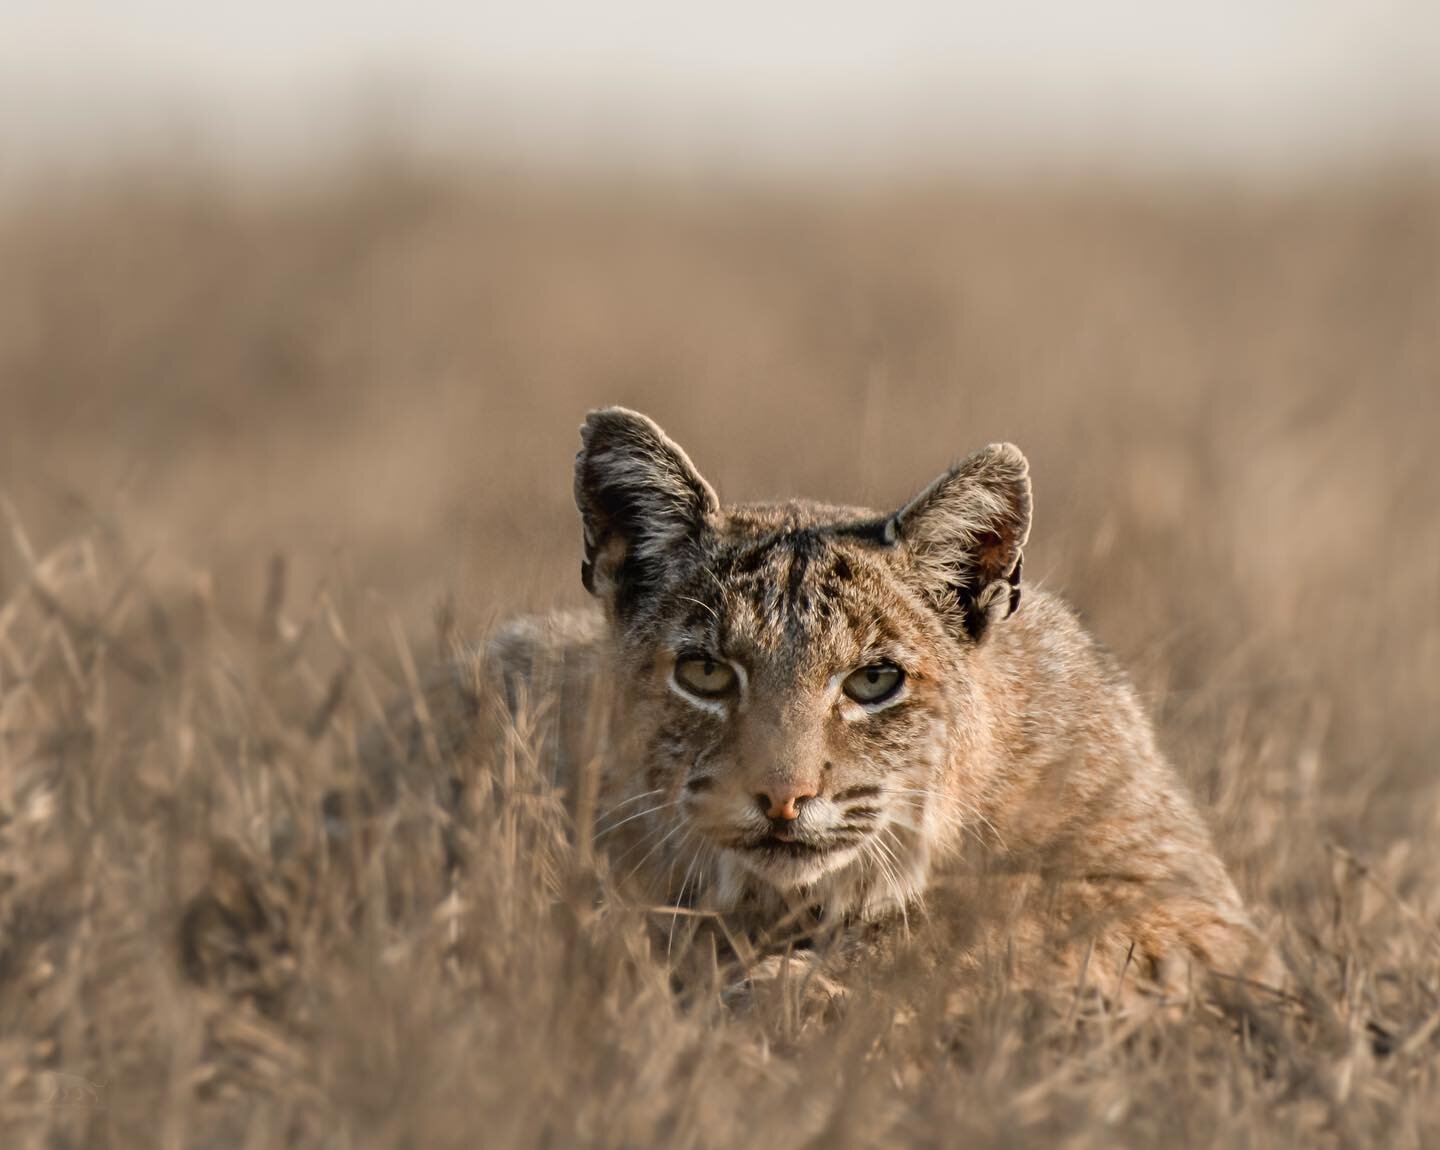 Late in California&rsquo;s dry season, a bobcat hunts an arid pasture. Without tall grasses to slink through, the cat relies heavily on its tawny coloration to  maintain stealth until the rains return and transform this palette from tawny to verdant.